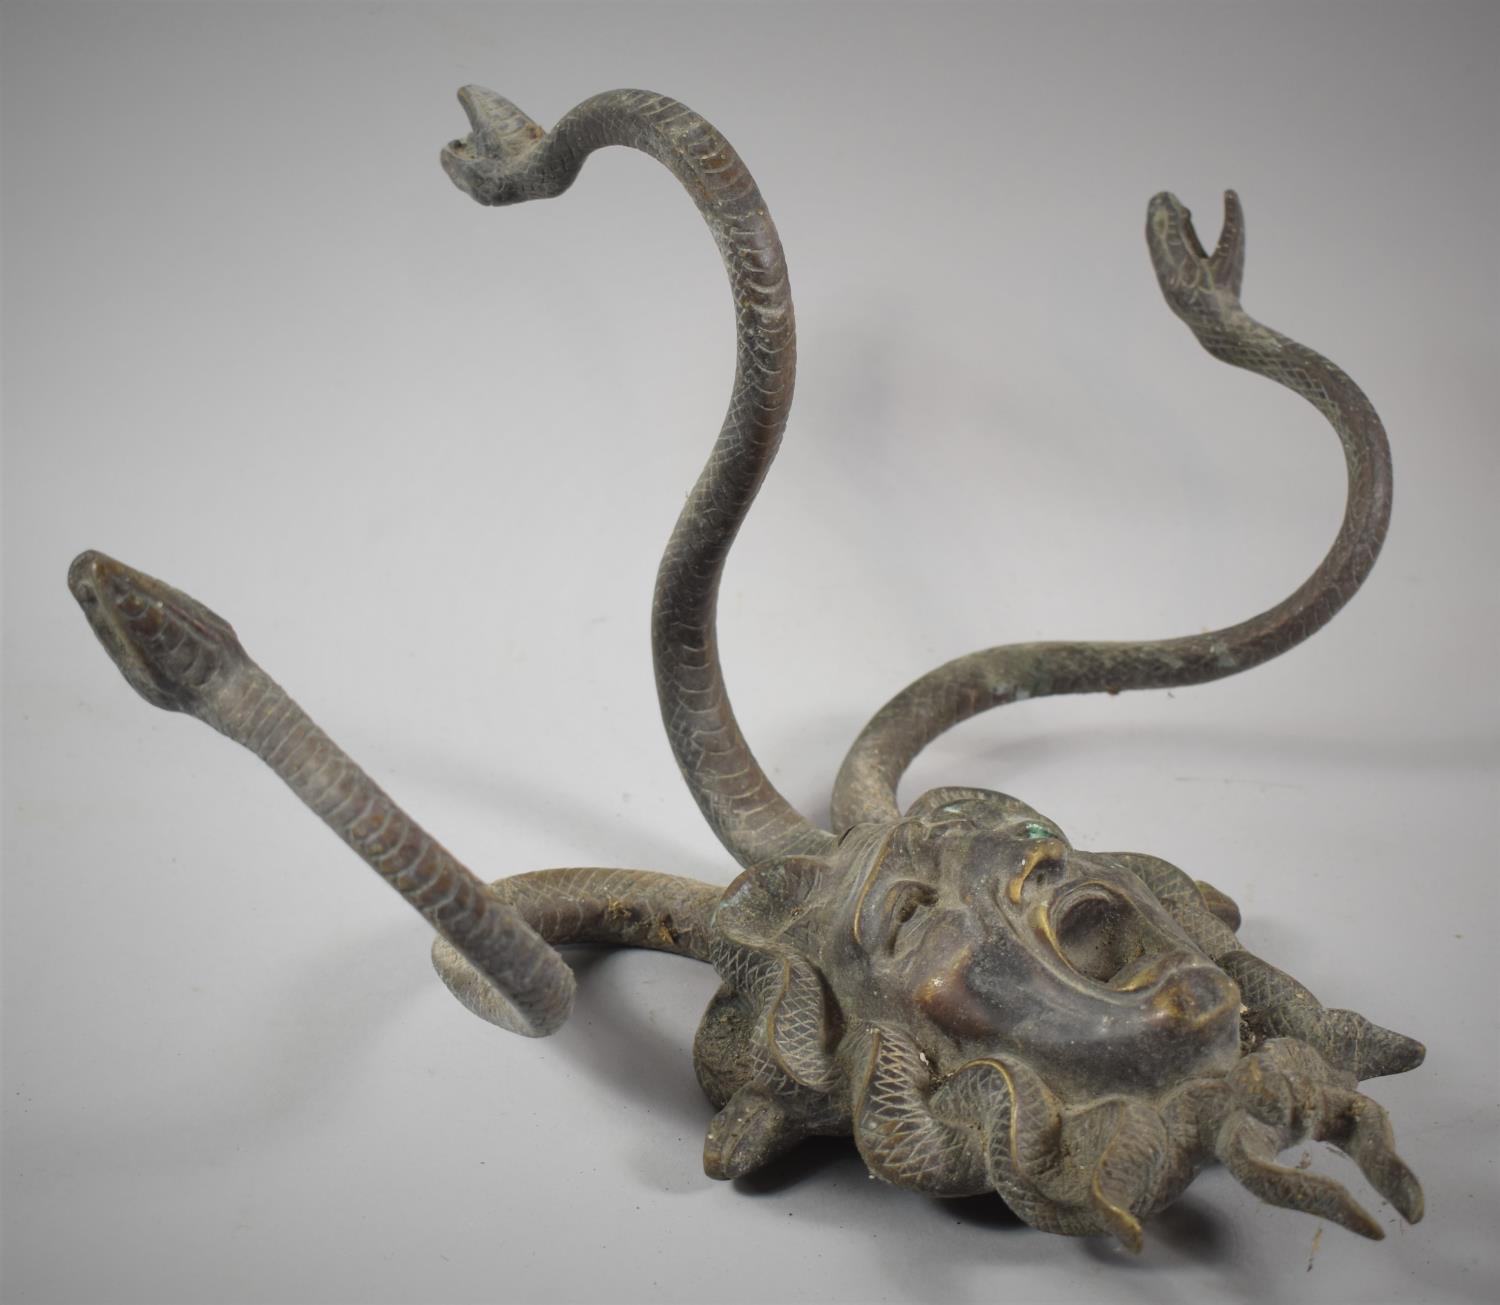 A Modern Cast Metal Bronze Effect Wall Hanging or Coat Rack in the Form of Medusa's Head with